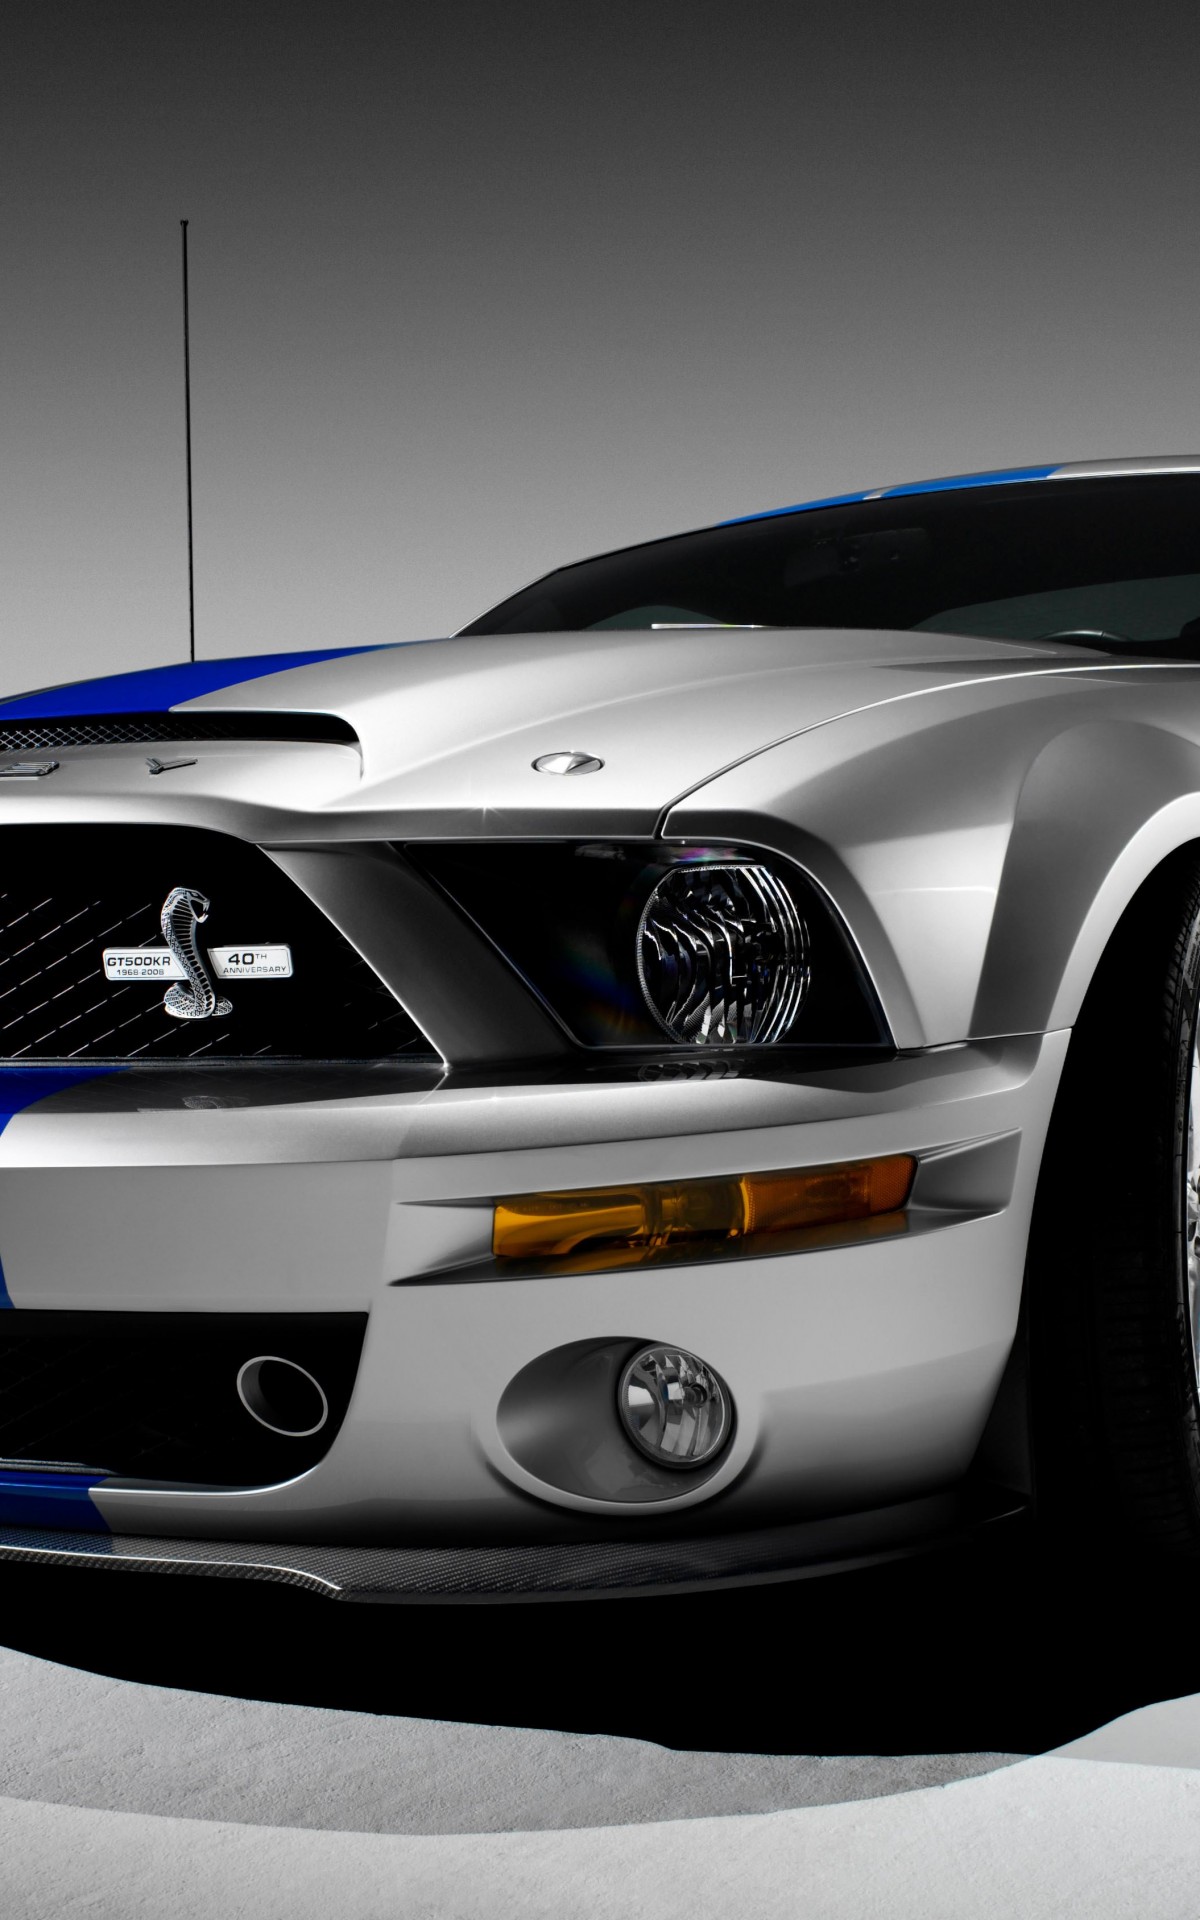 Shelby Mustang GT500KR Wallpaper for Amazon Kindle Fire HDX